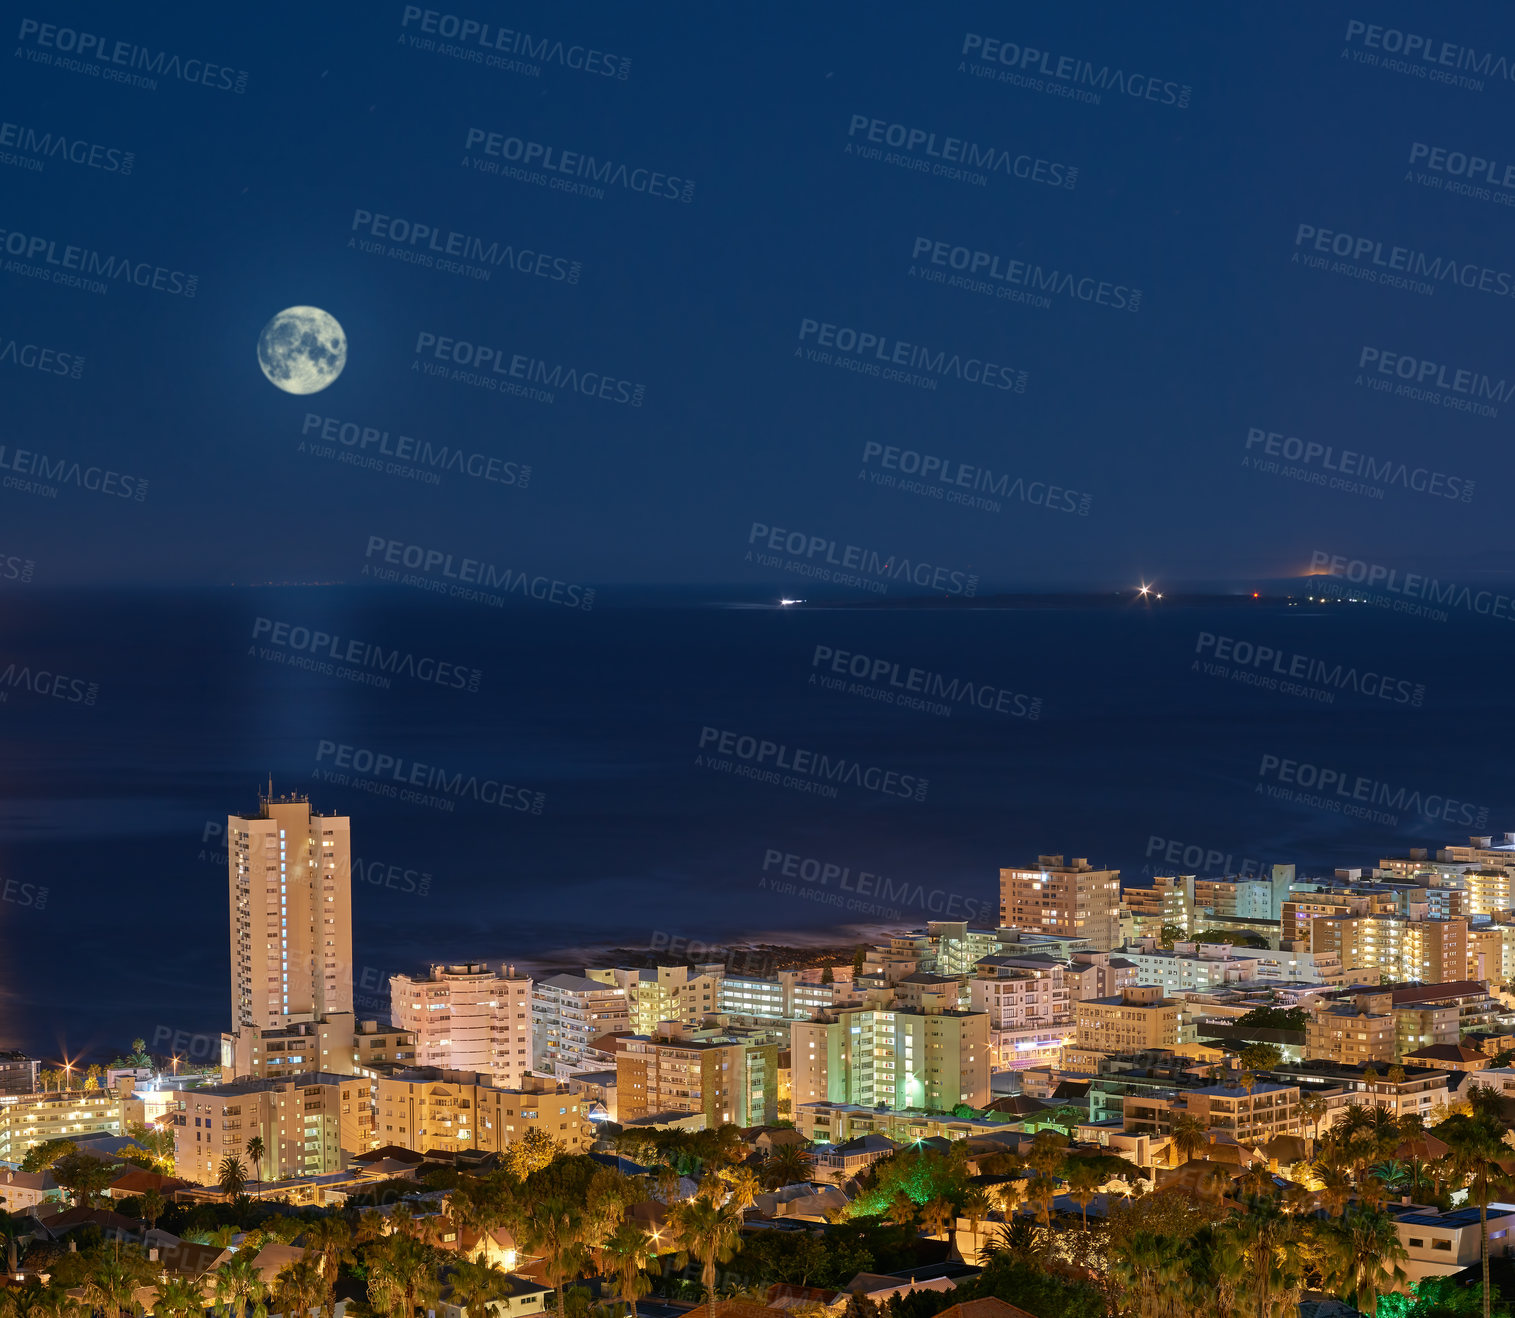 Buy stock photo Urban city lights with a full moon in the midnight sky copy space. Skyline with colorful lighting with the wide open ocean on the horizon. Modern metroplitan architectural buildings at night